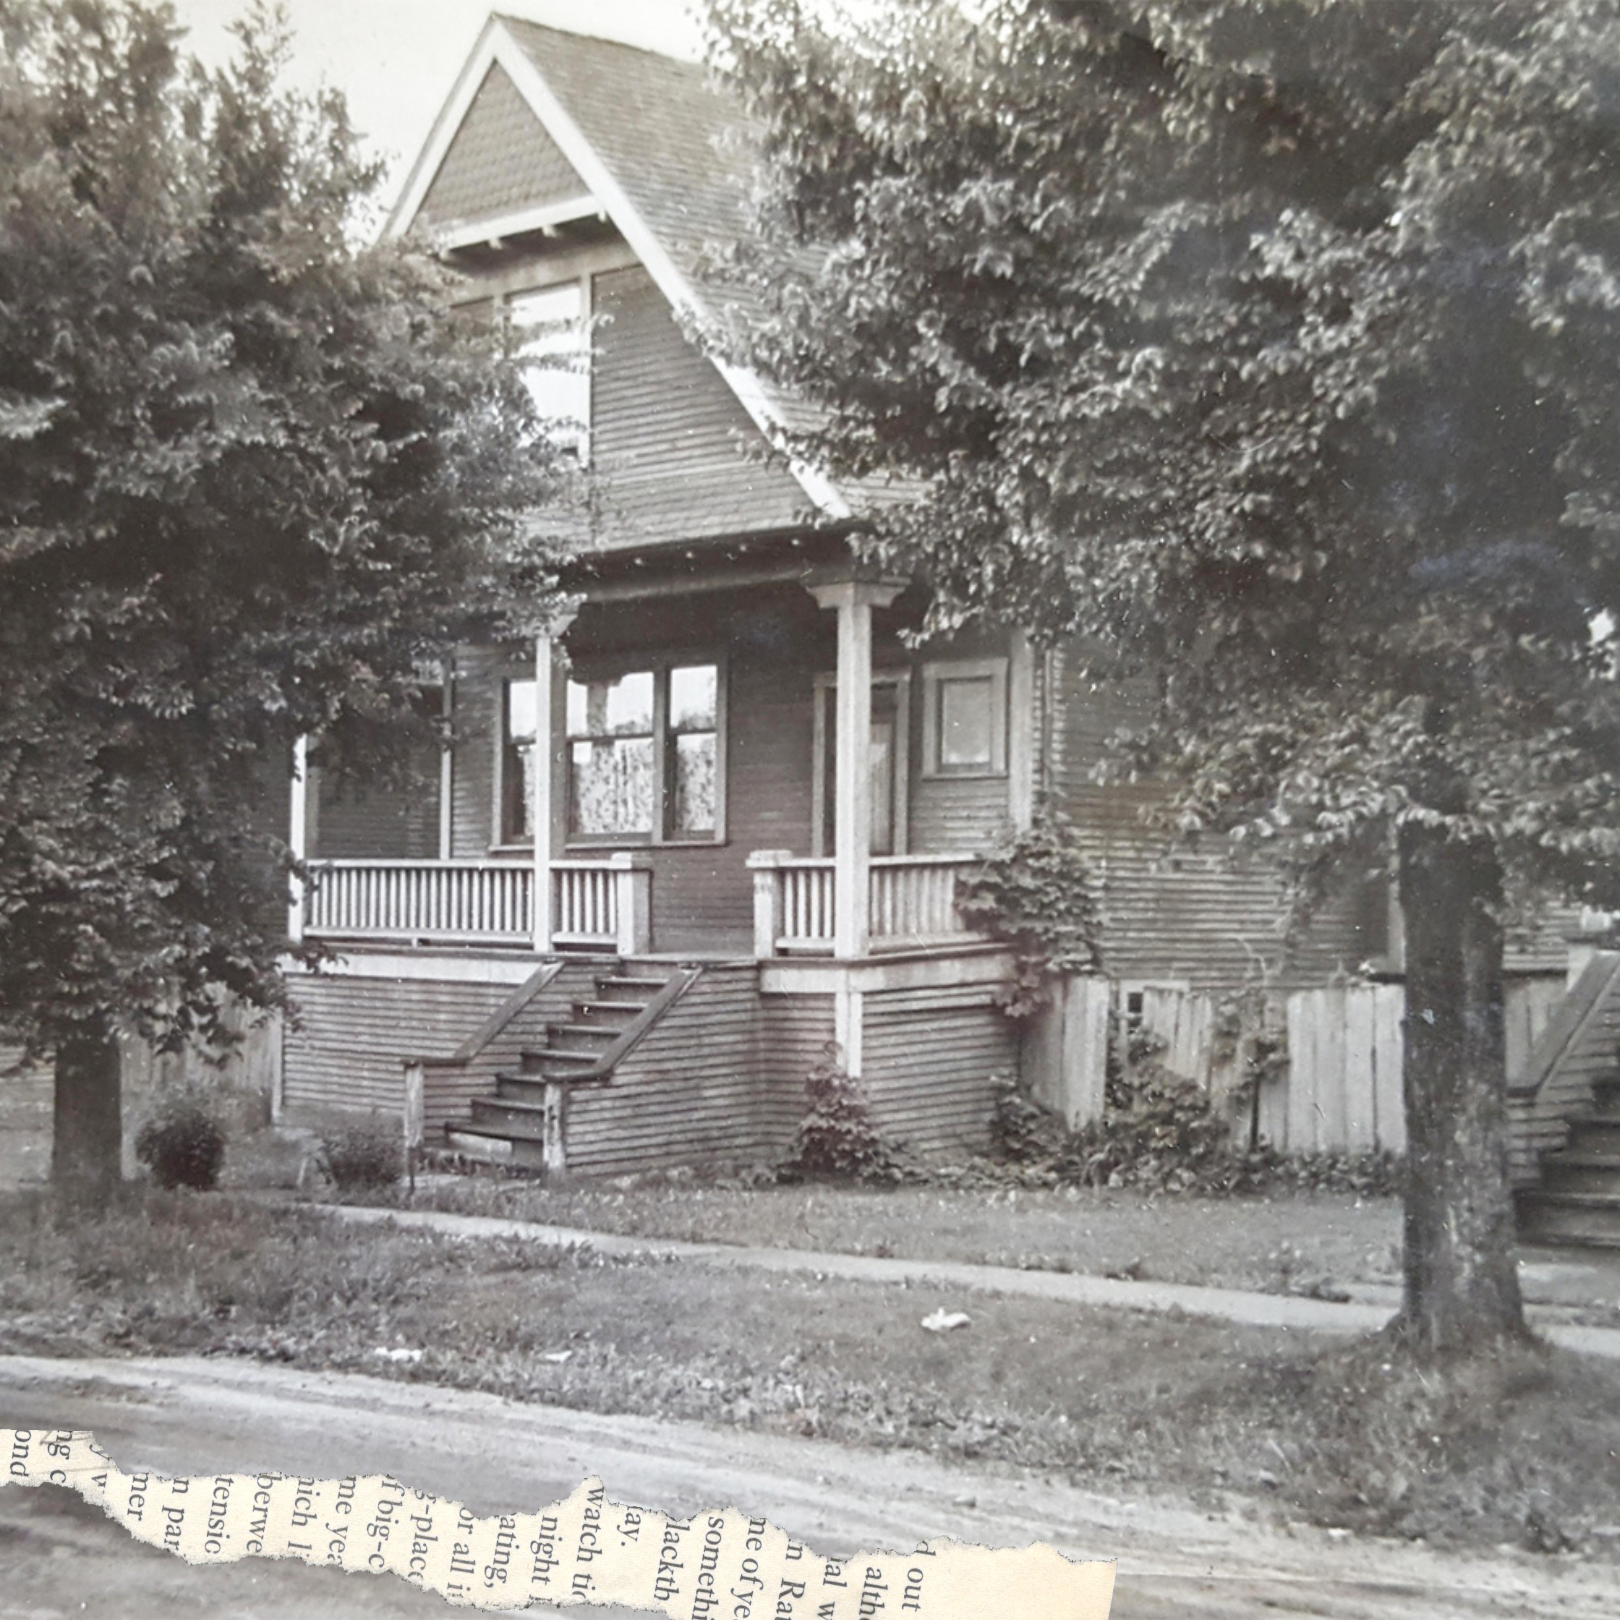 Photo of original 1910 houses at West 17th Avenue in Vancouver, photographed circa the 1950's.